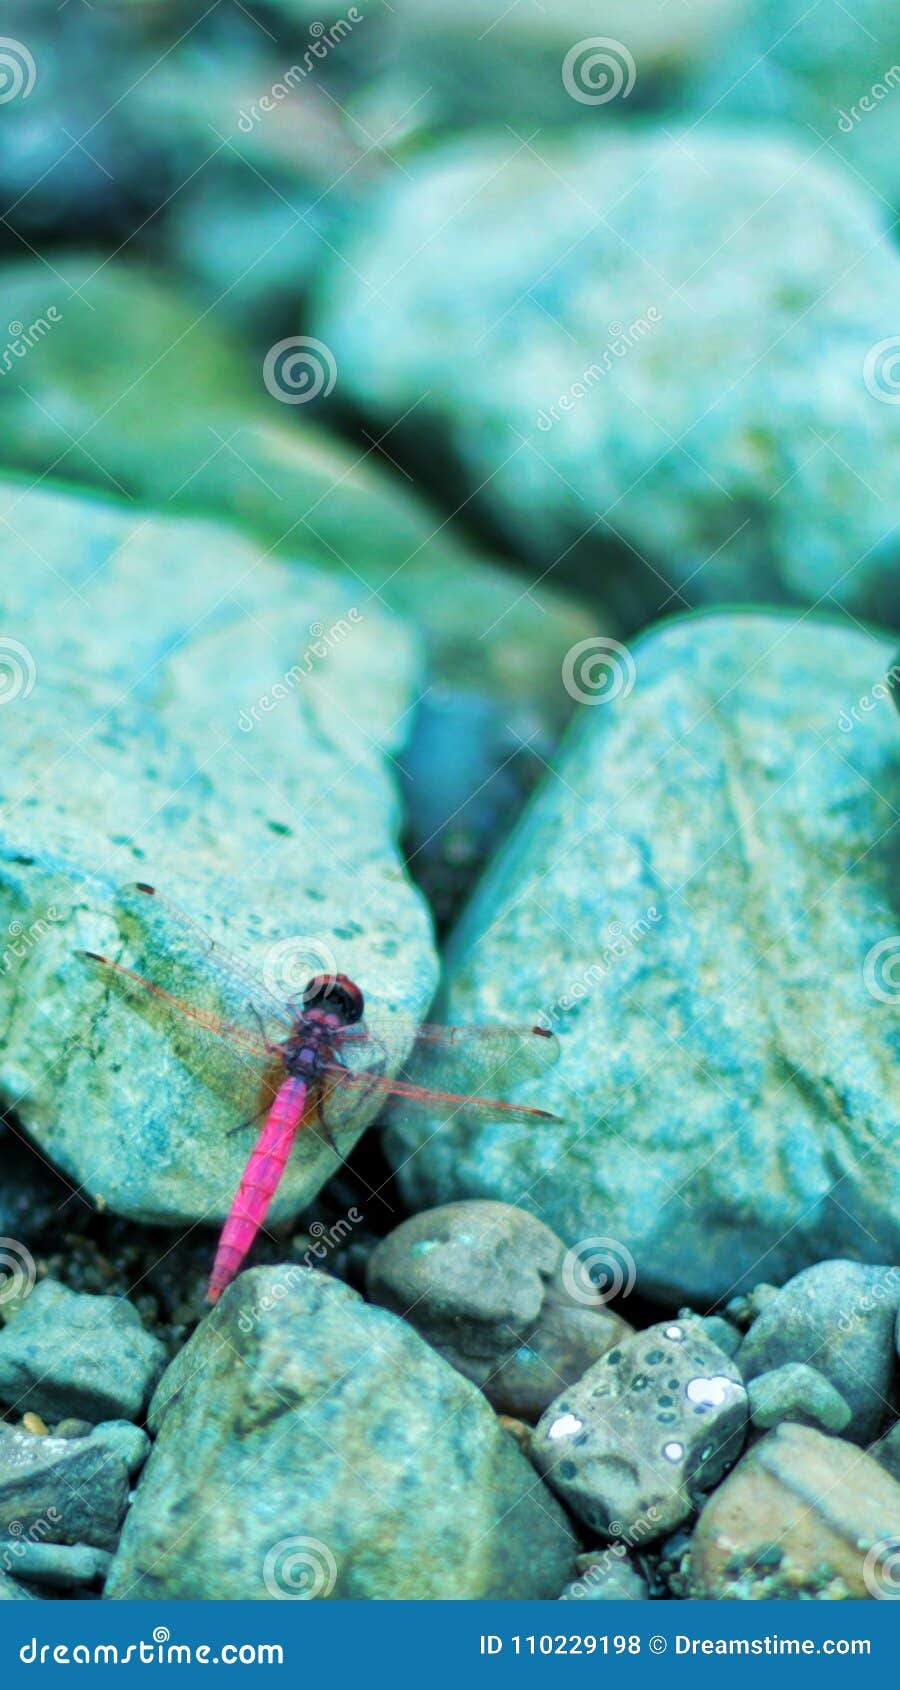 pink dragonfly in monsoon